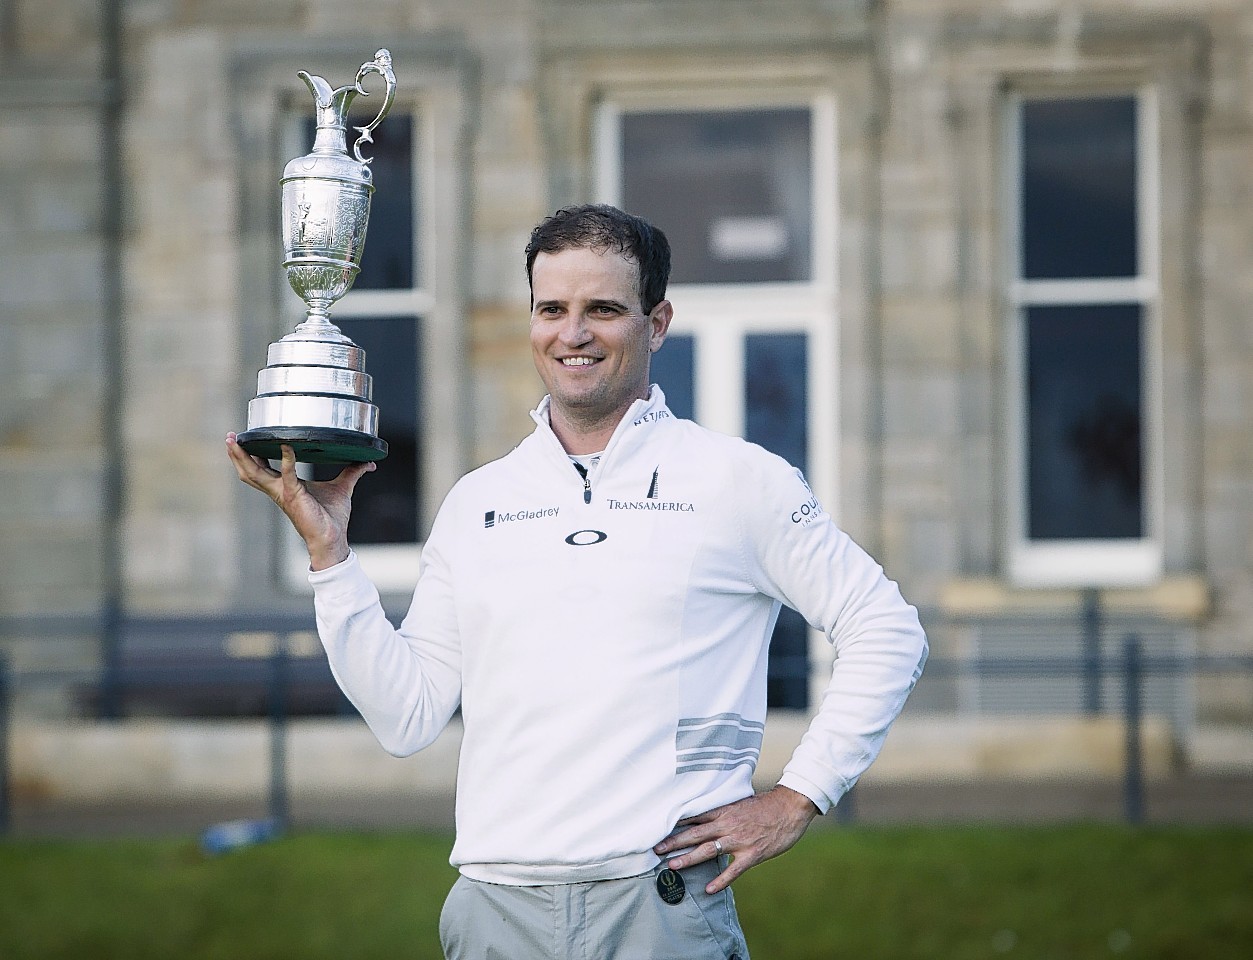 Johnson celebrates with the Claret Jug after winning The Open Championship 